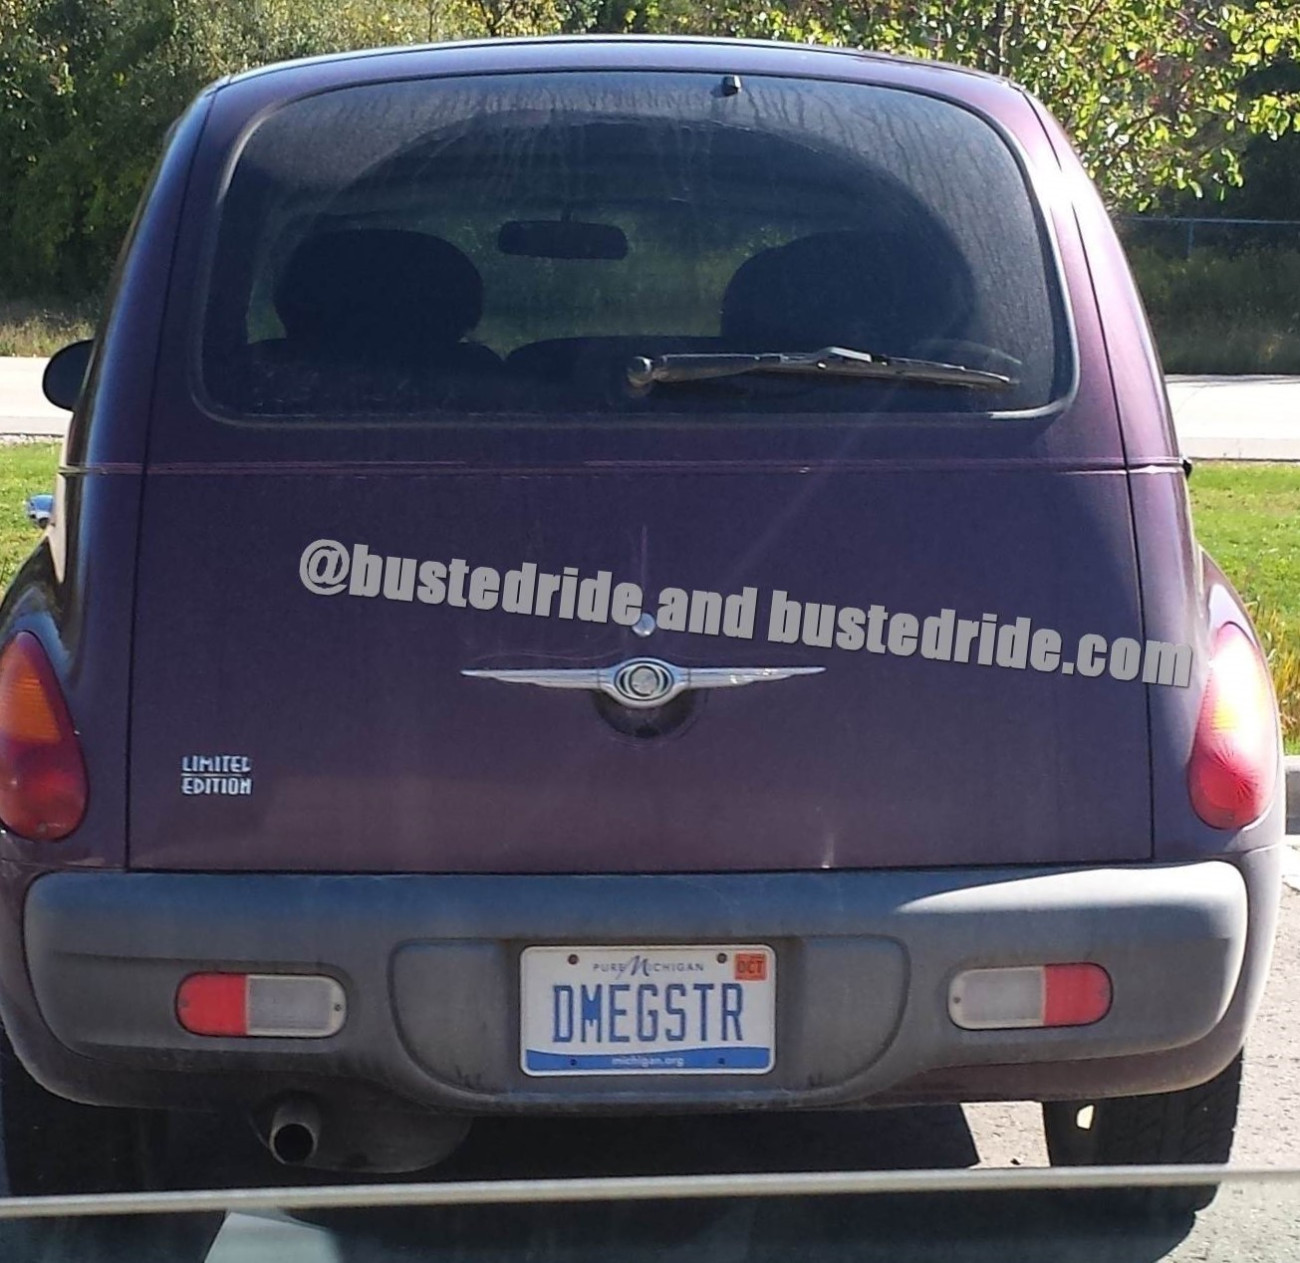 DMegstr - Vanity License Plate by Busted Ride